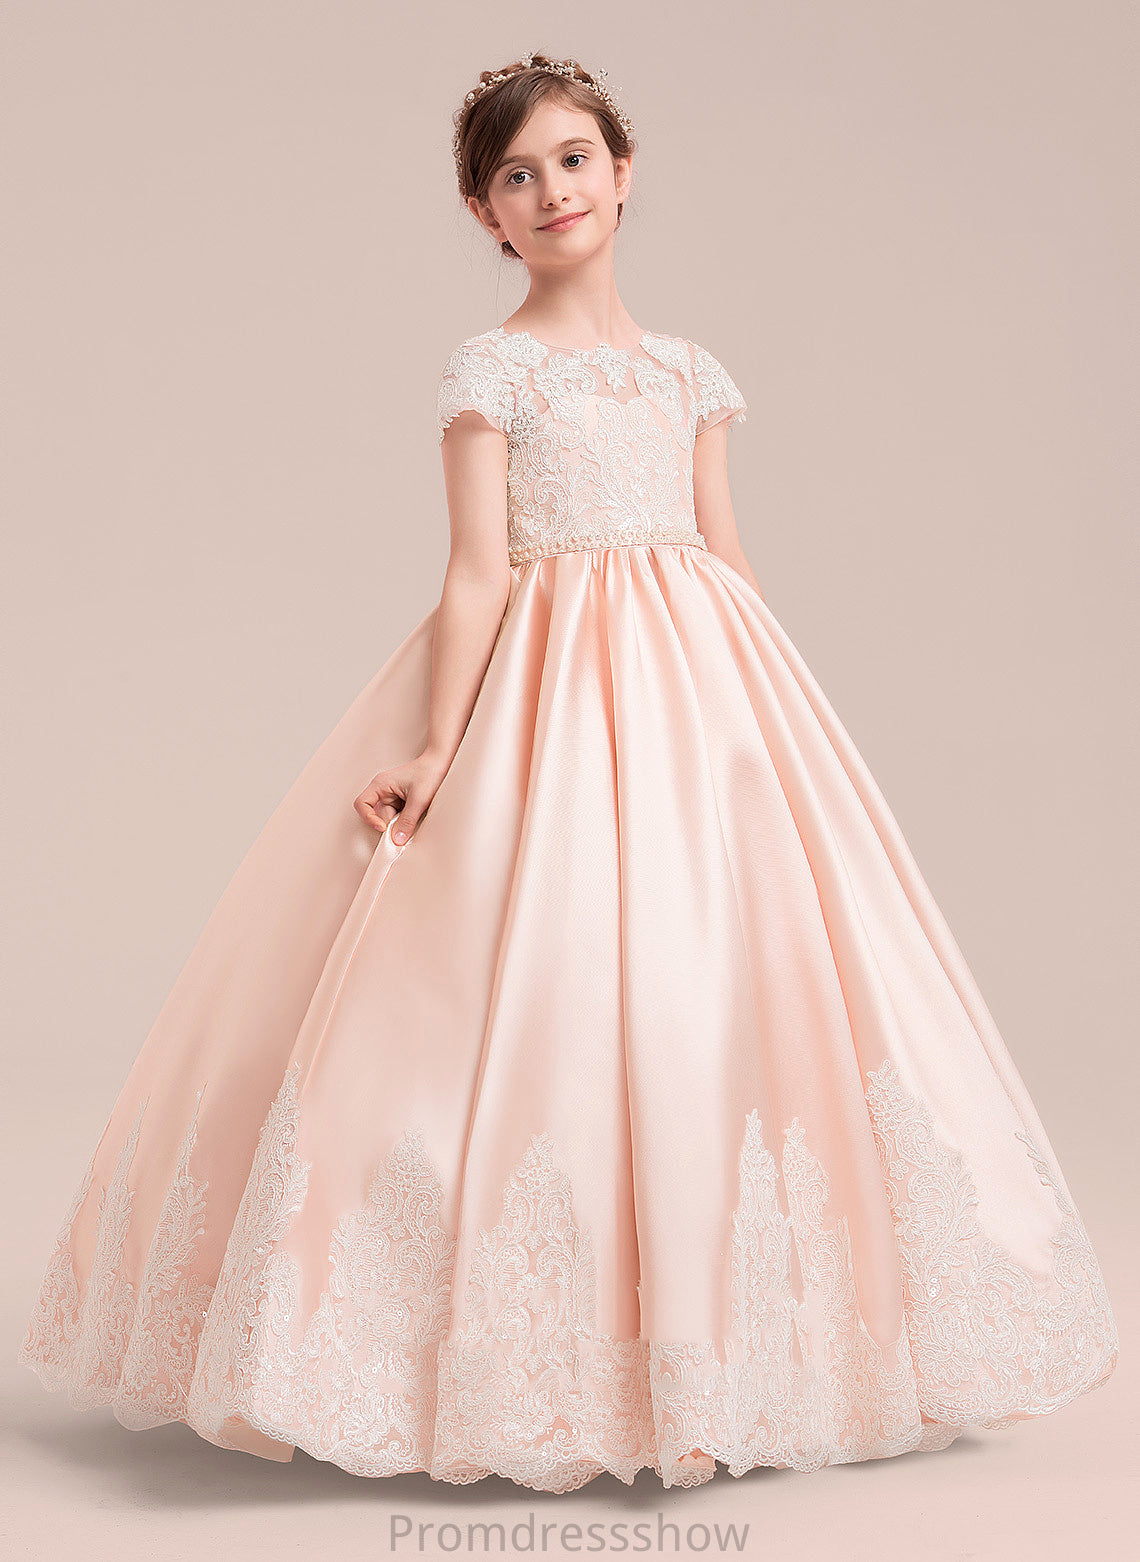 NOT Neck Ball included) Flower Flower Girl Dresses - Satin/Tulle/Lace Sleeves Girl Scoop Short Floor-length (Petticoat Gown Beading Viola Dress With